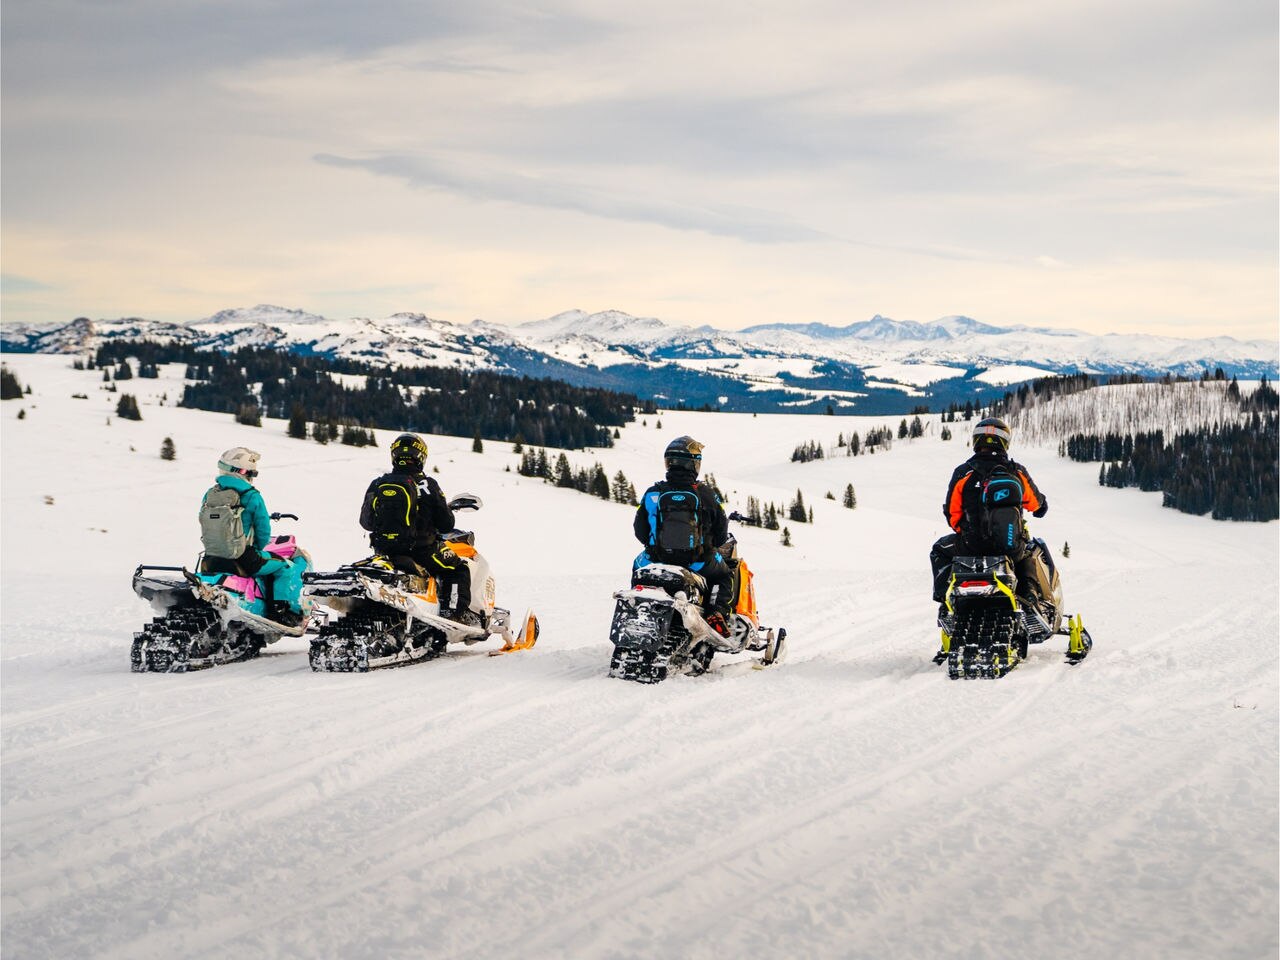 Have a blast on this full-day guided mountain Ski-Doo tour in Sheridan, WY